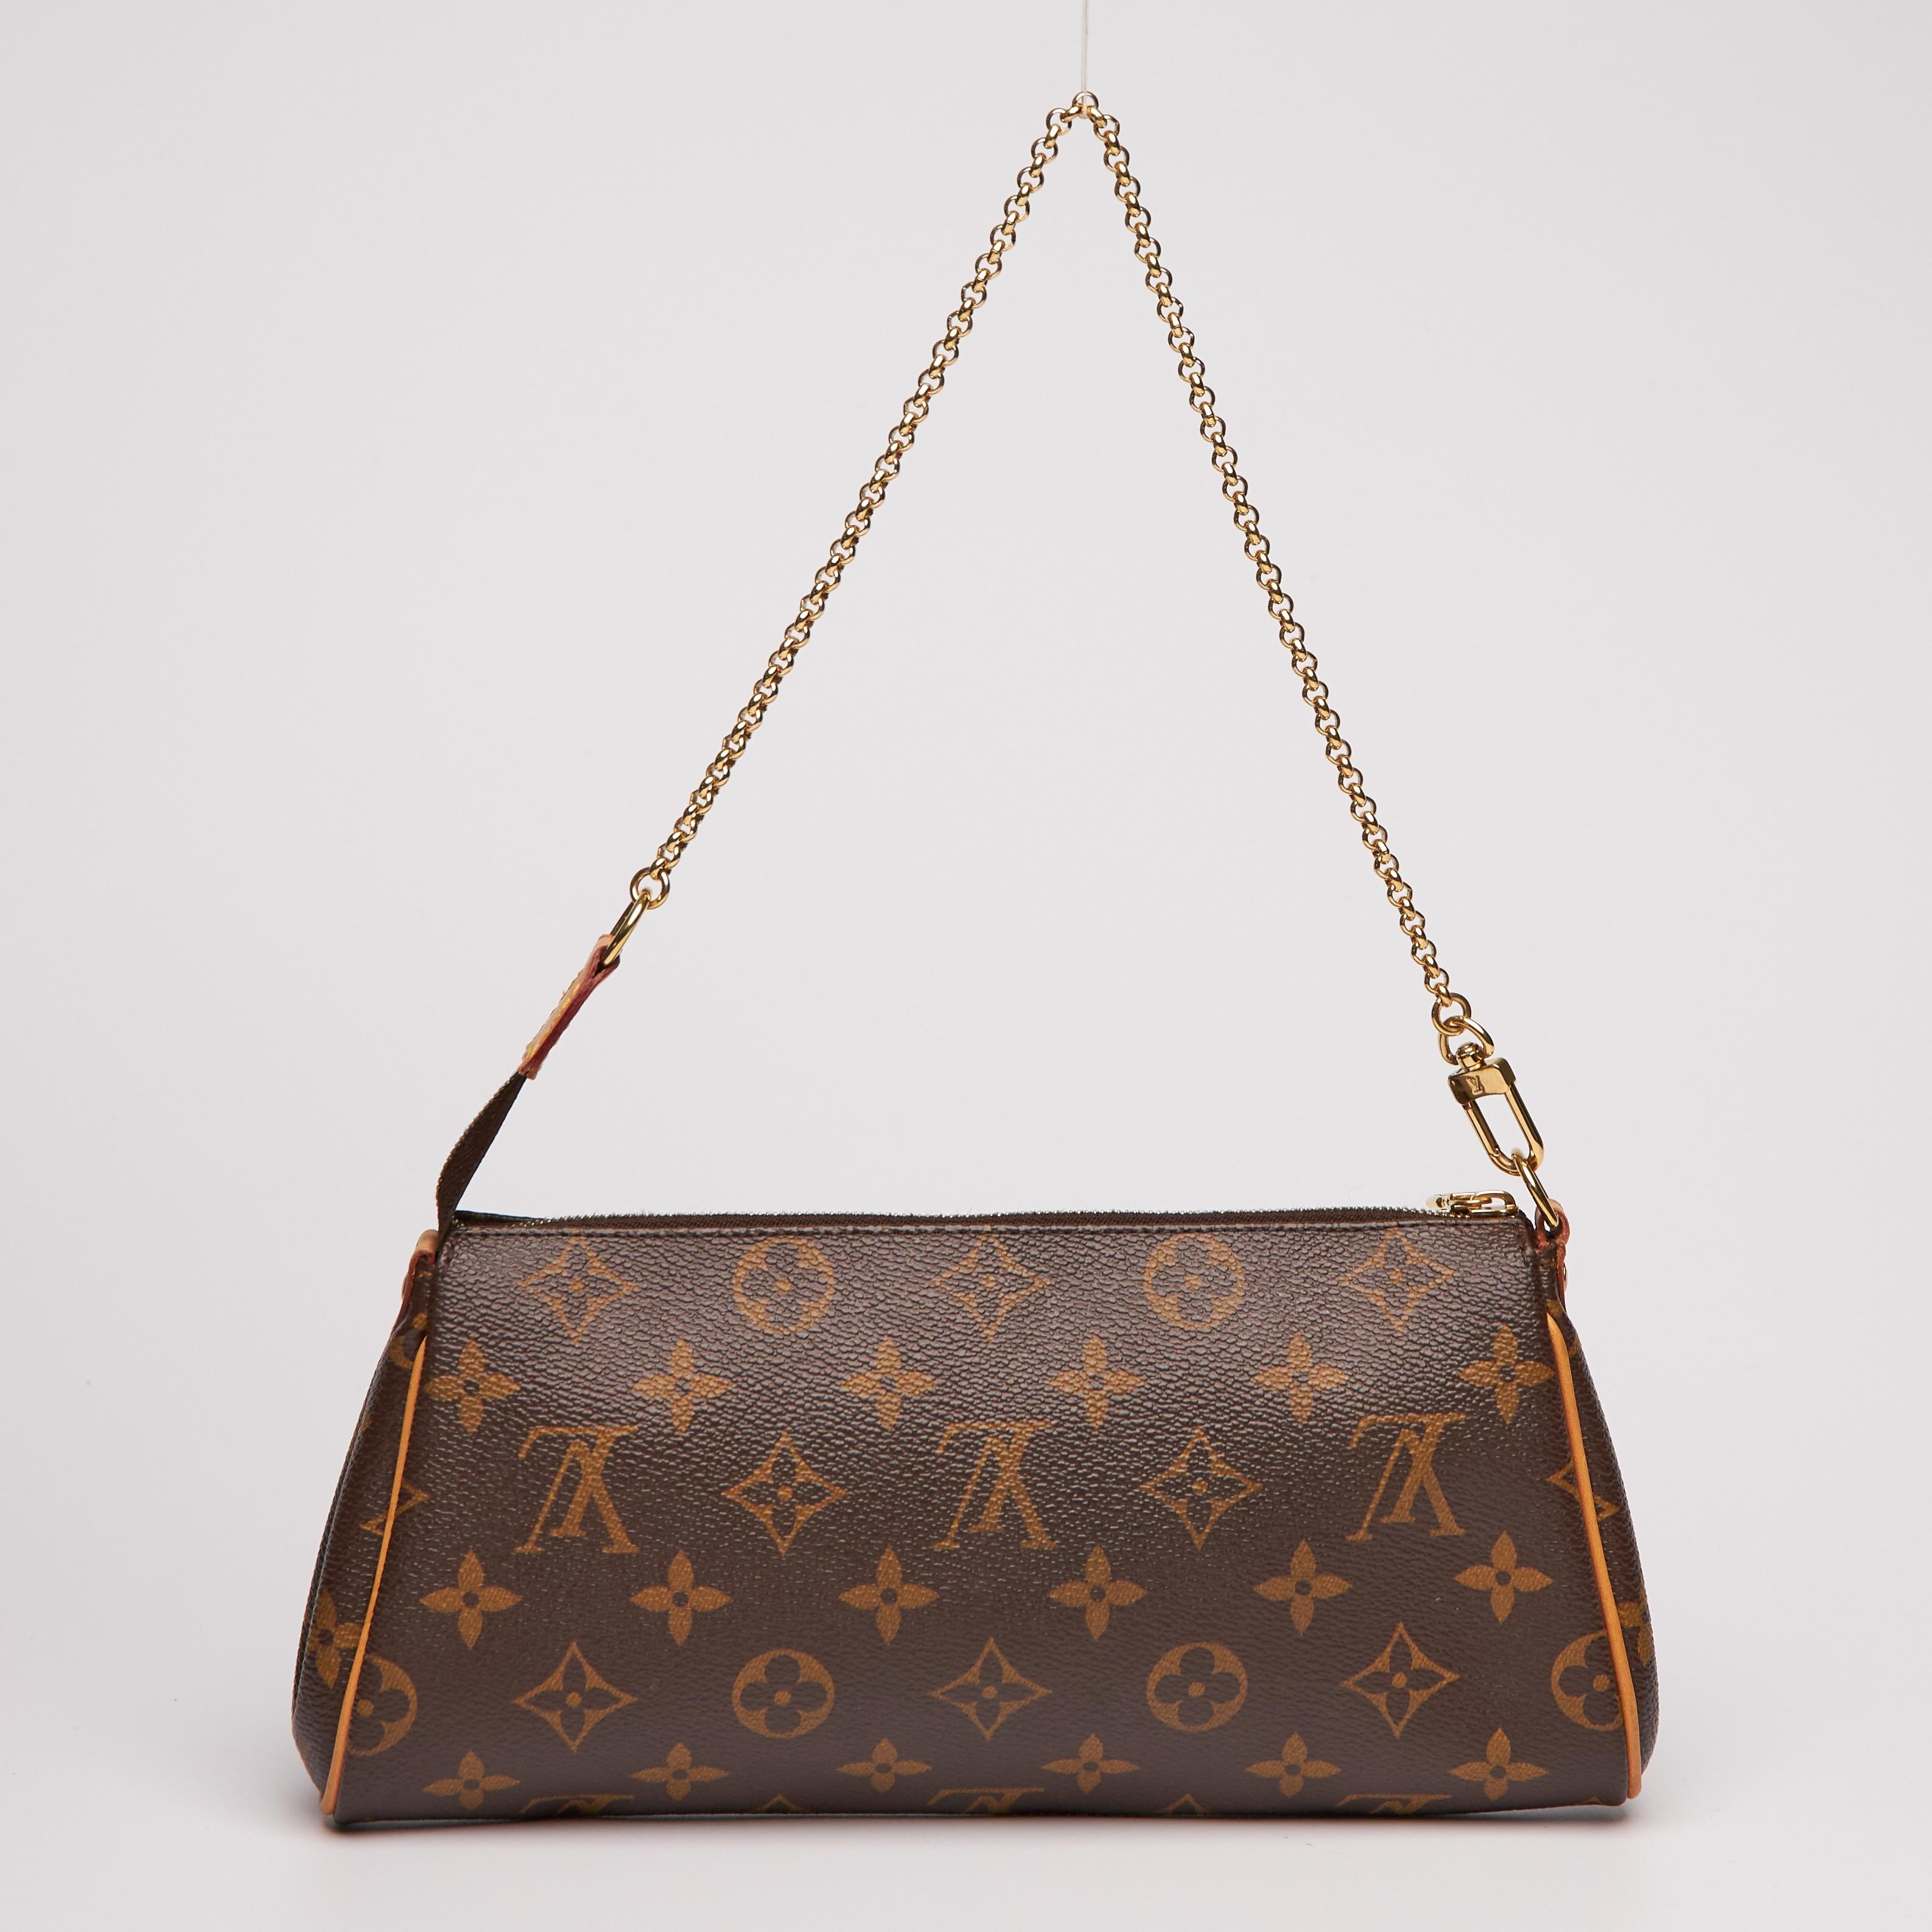 This and versatile bag is made of classic Louis Vuitton monogram coated canvas. This clutch features an elegant polished brass chain strap, a vachetta leather shoulder strap, matching trim, and a Louis Vuitton signature nameplate on the front. The